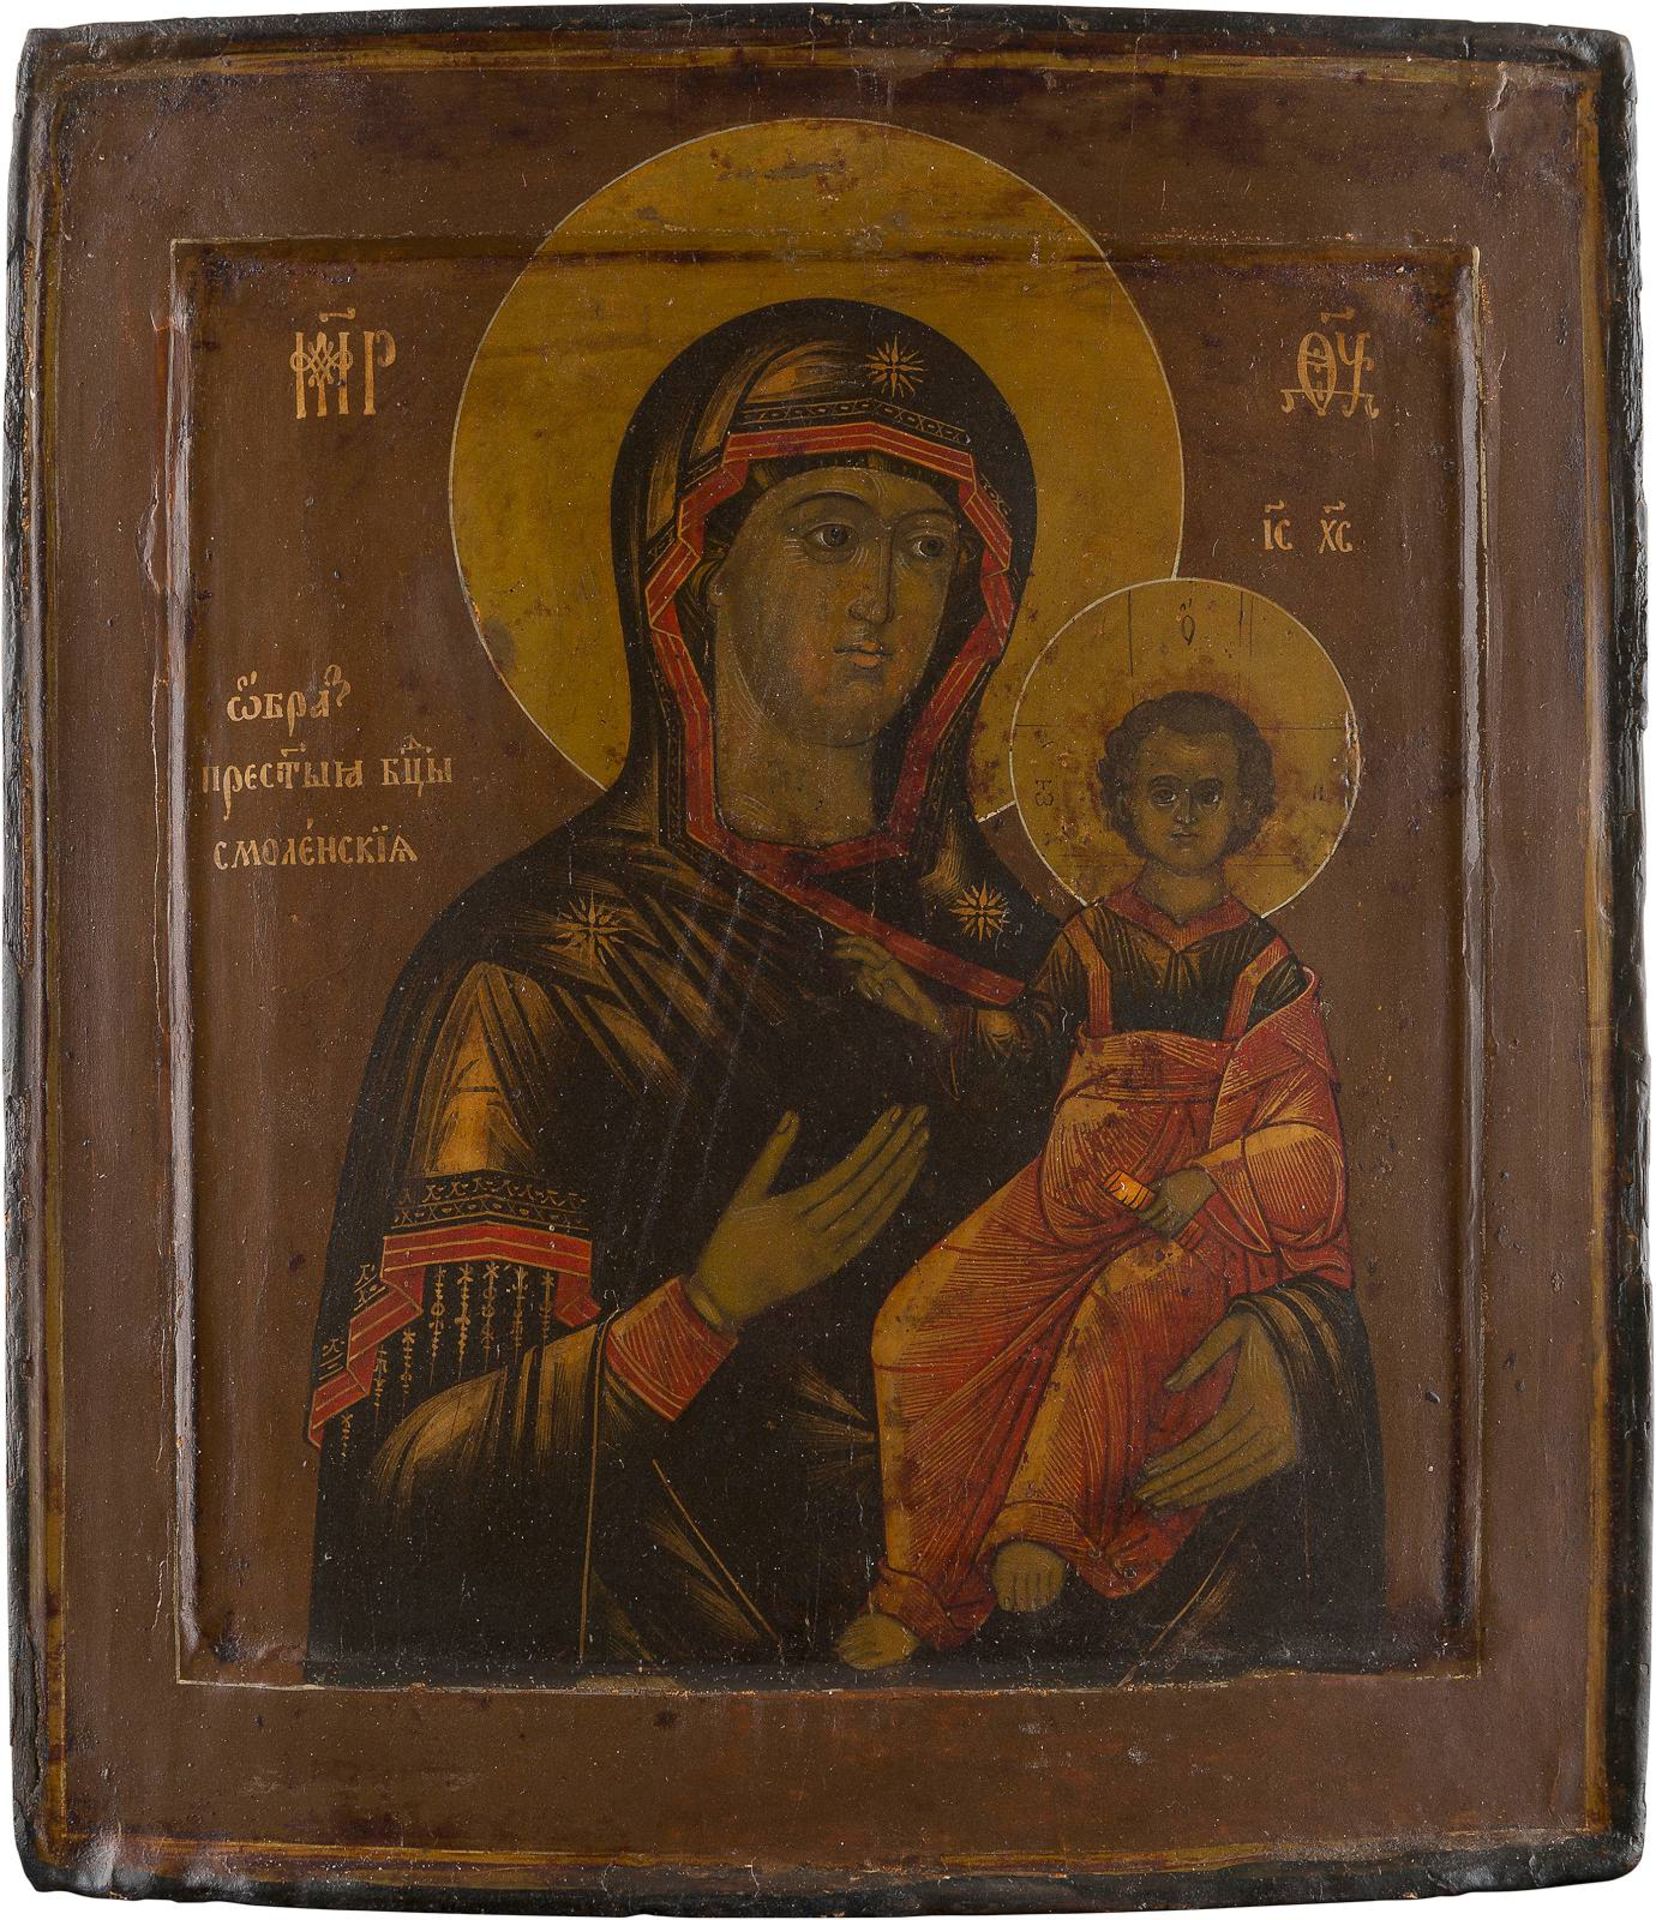 AN ICON SHOWING THE SMOLENSKAYA MOTHER OF GODRussian, 17th century Tempera on wood panel with double